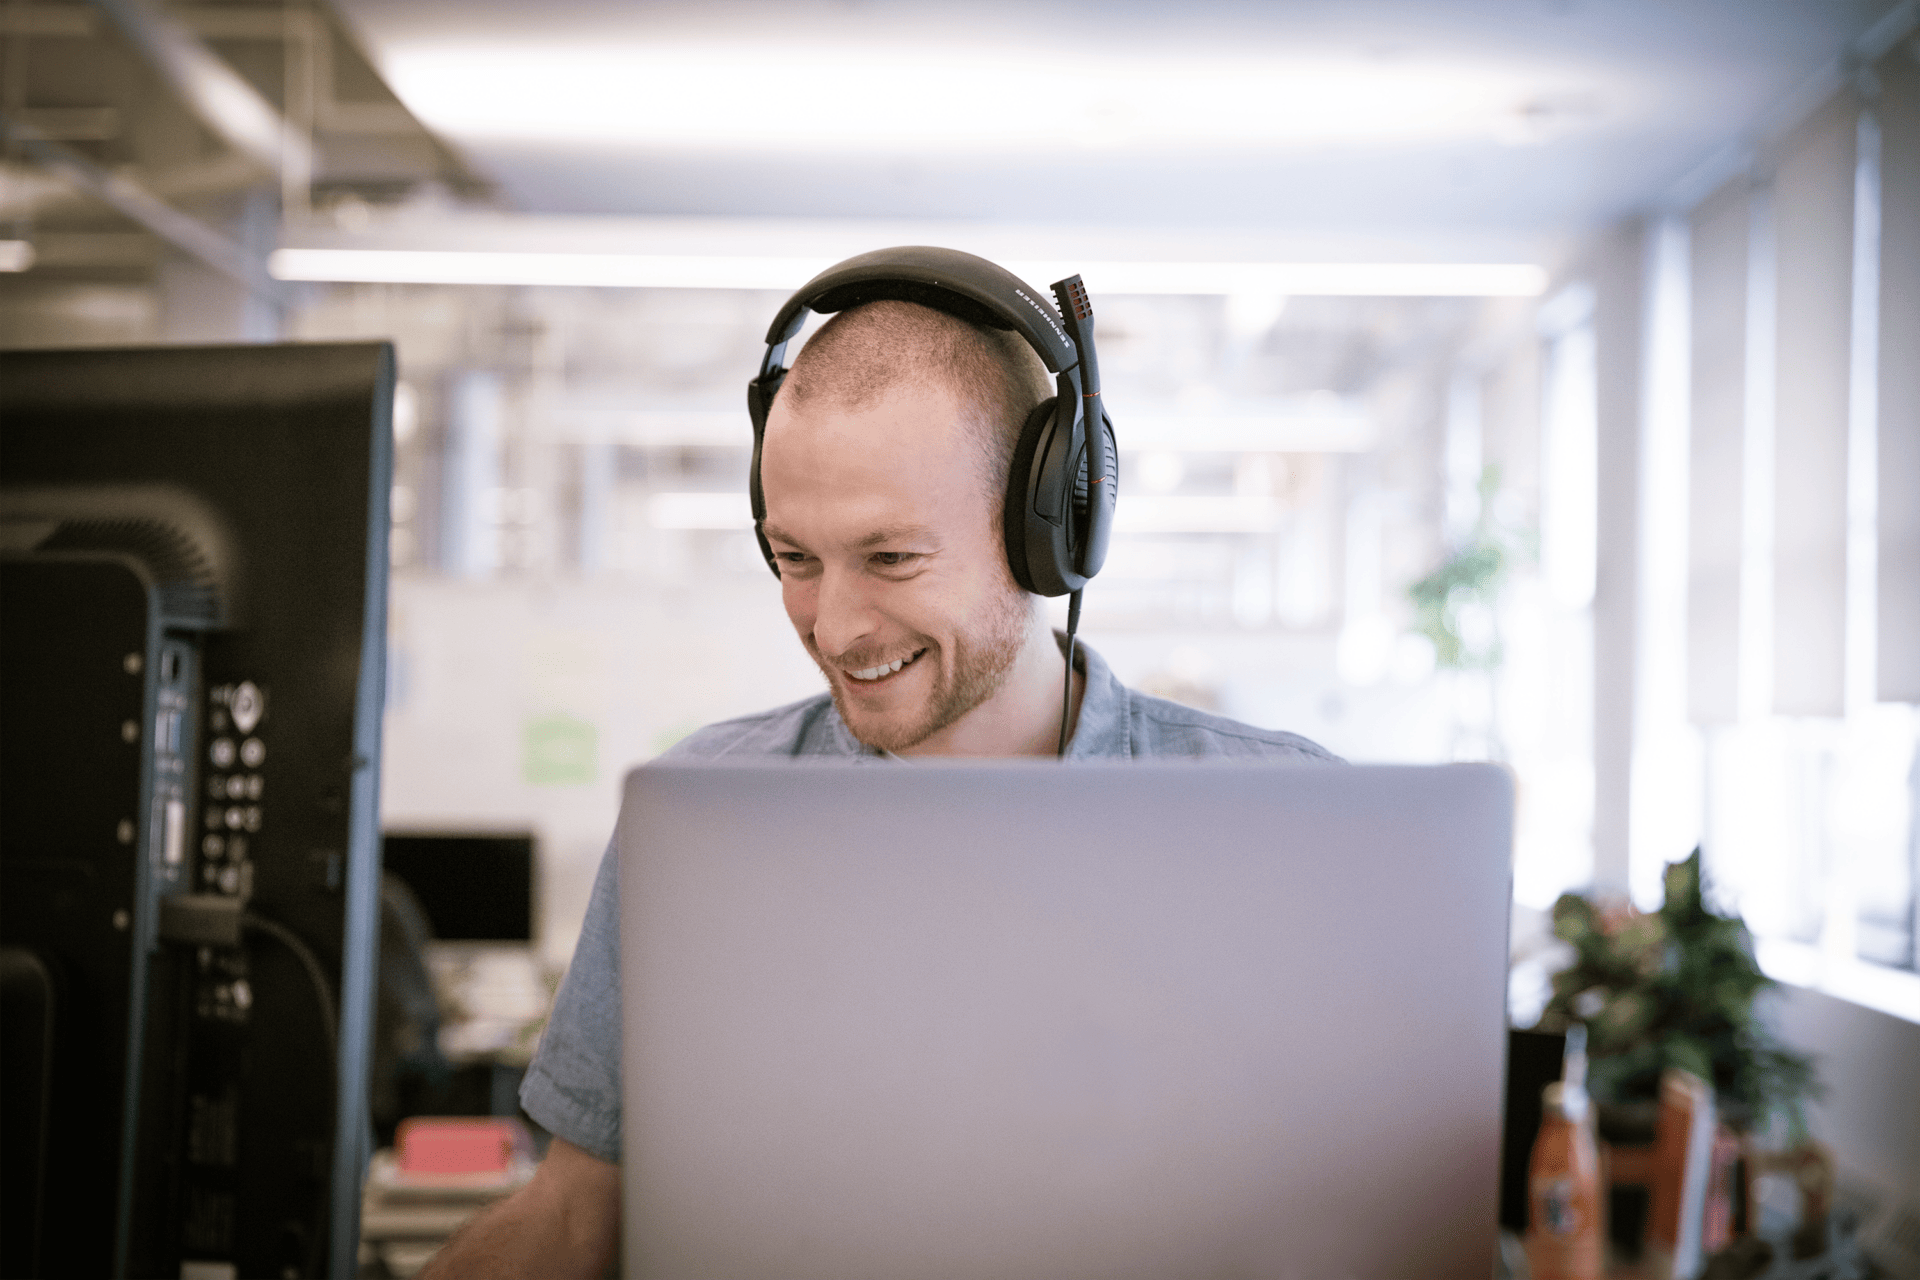 A smiling man wearing headphones and using a laptop in a brightly lit office space for Amplify Tutoring services.